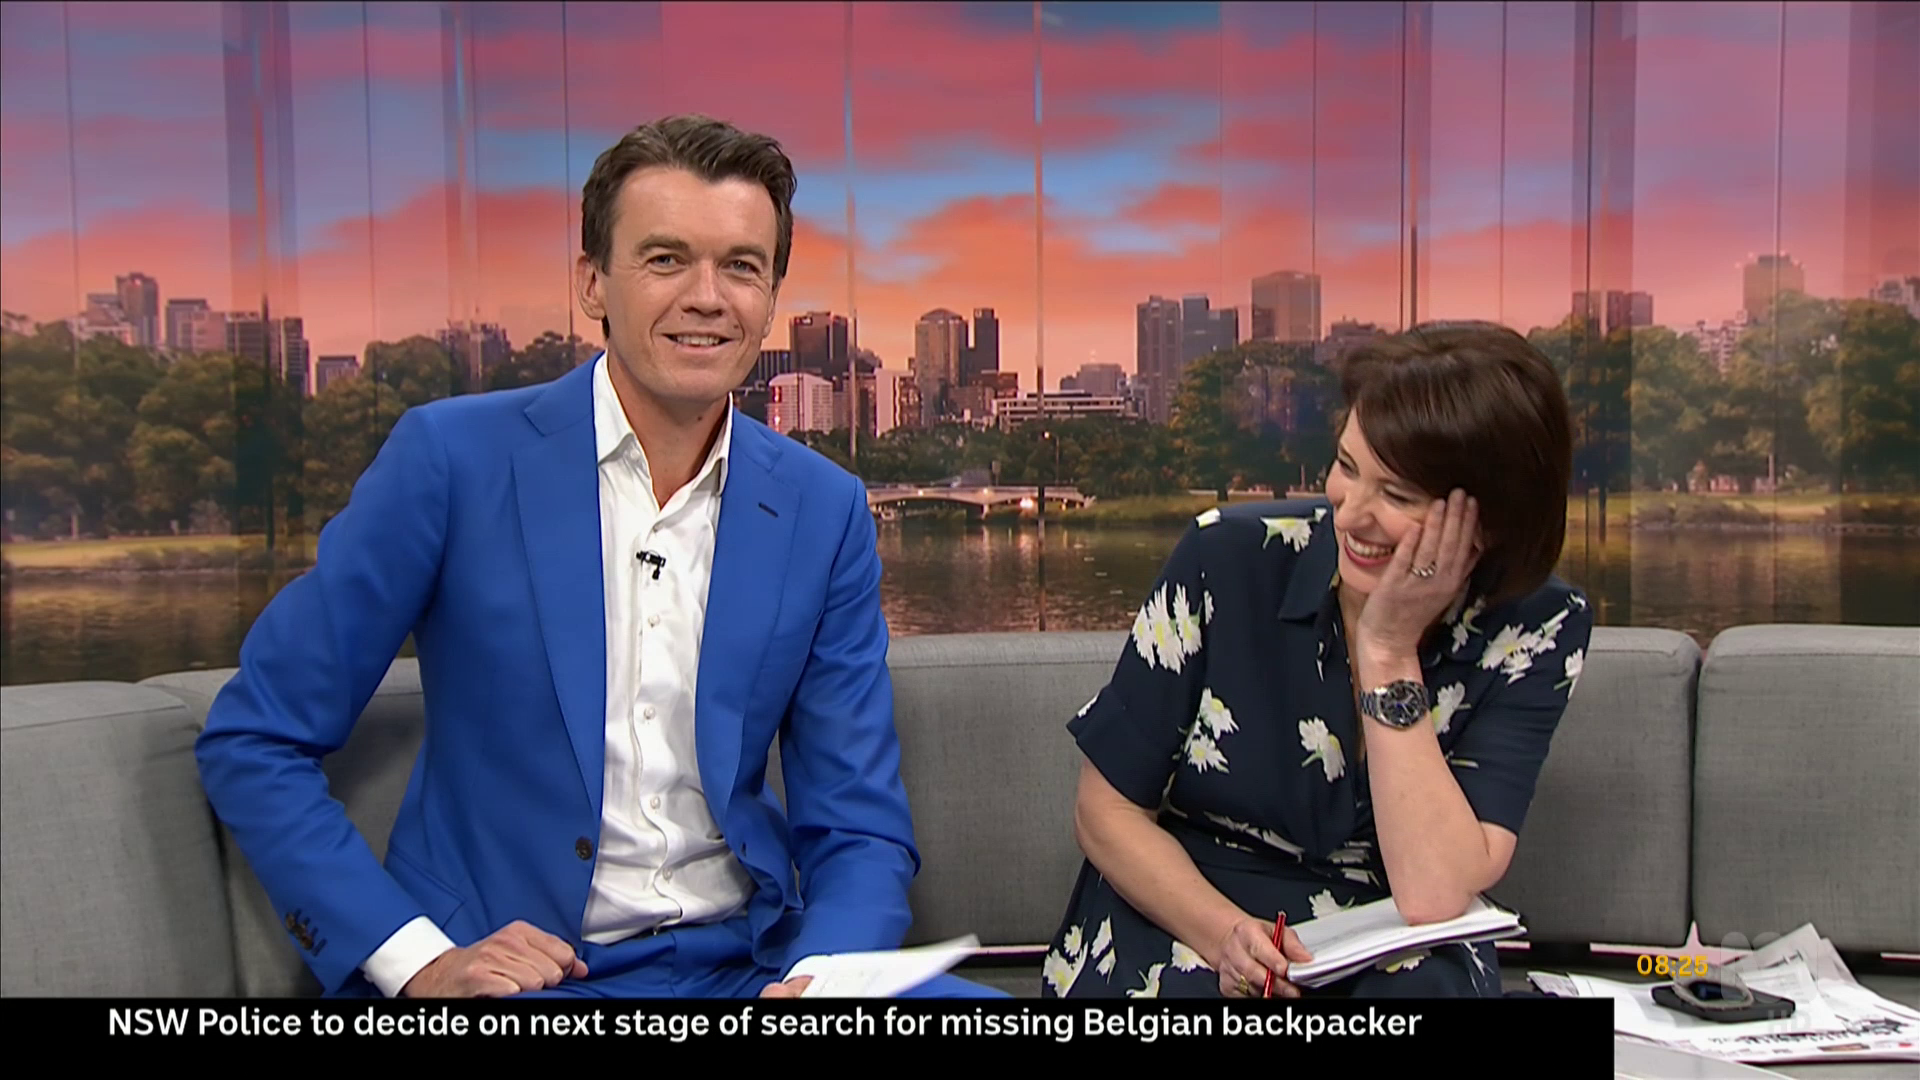   Virginia Trioli  gets the giggles during the introduction to a serious story on  ABC News Breakfast   IMAGE: ABC 